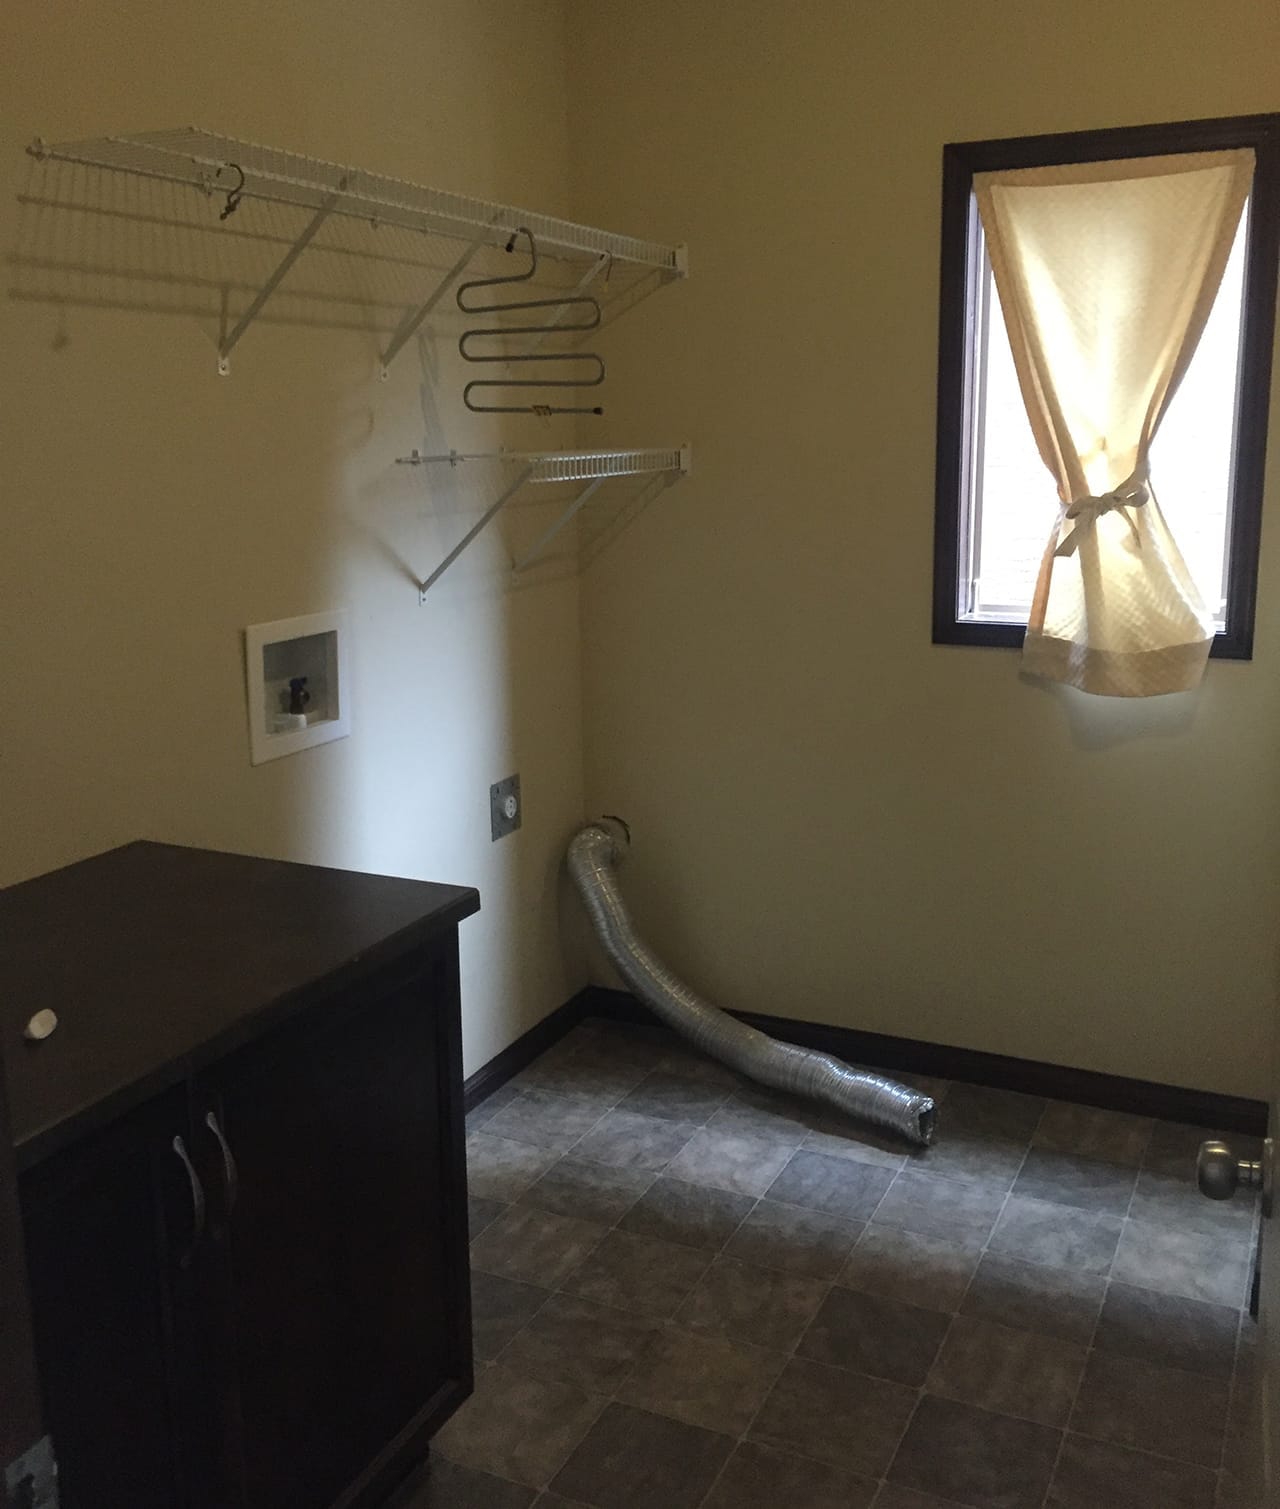 A laundry room with two cabinets and several rows of wire rack shelving.